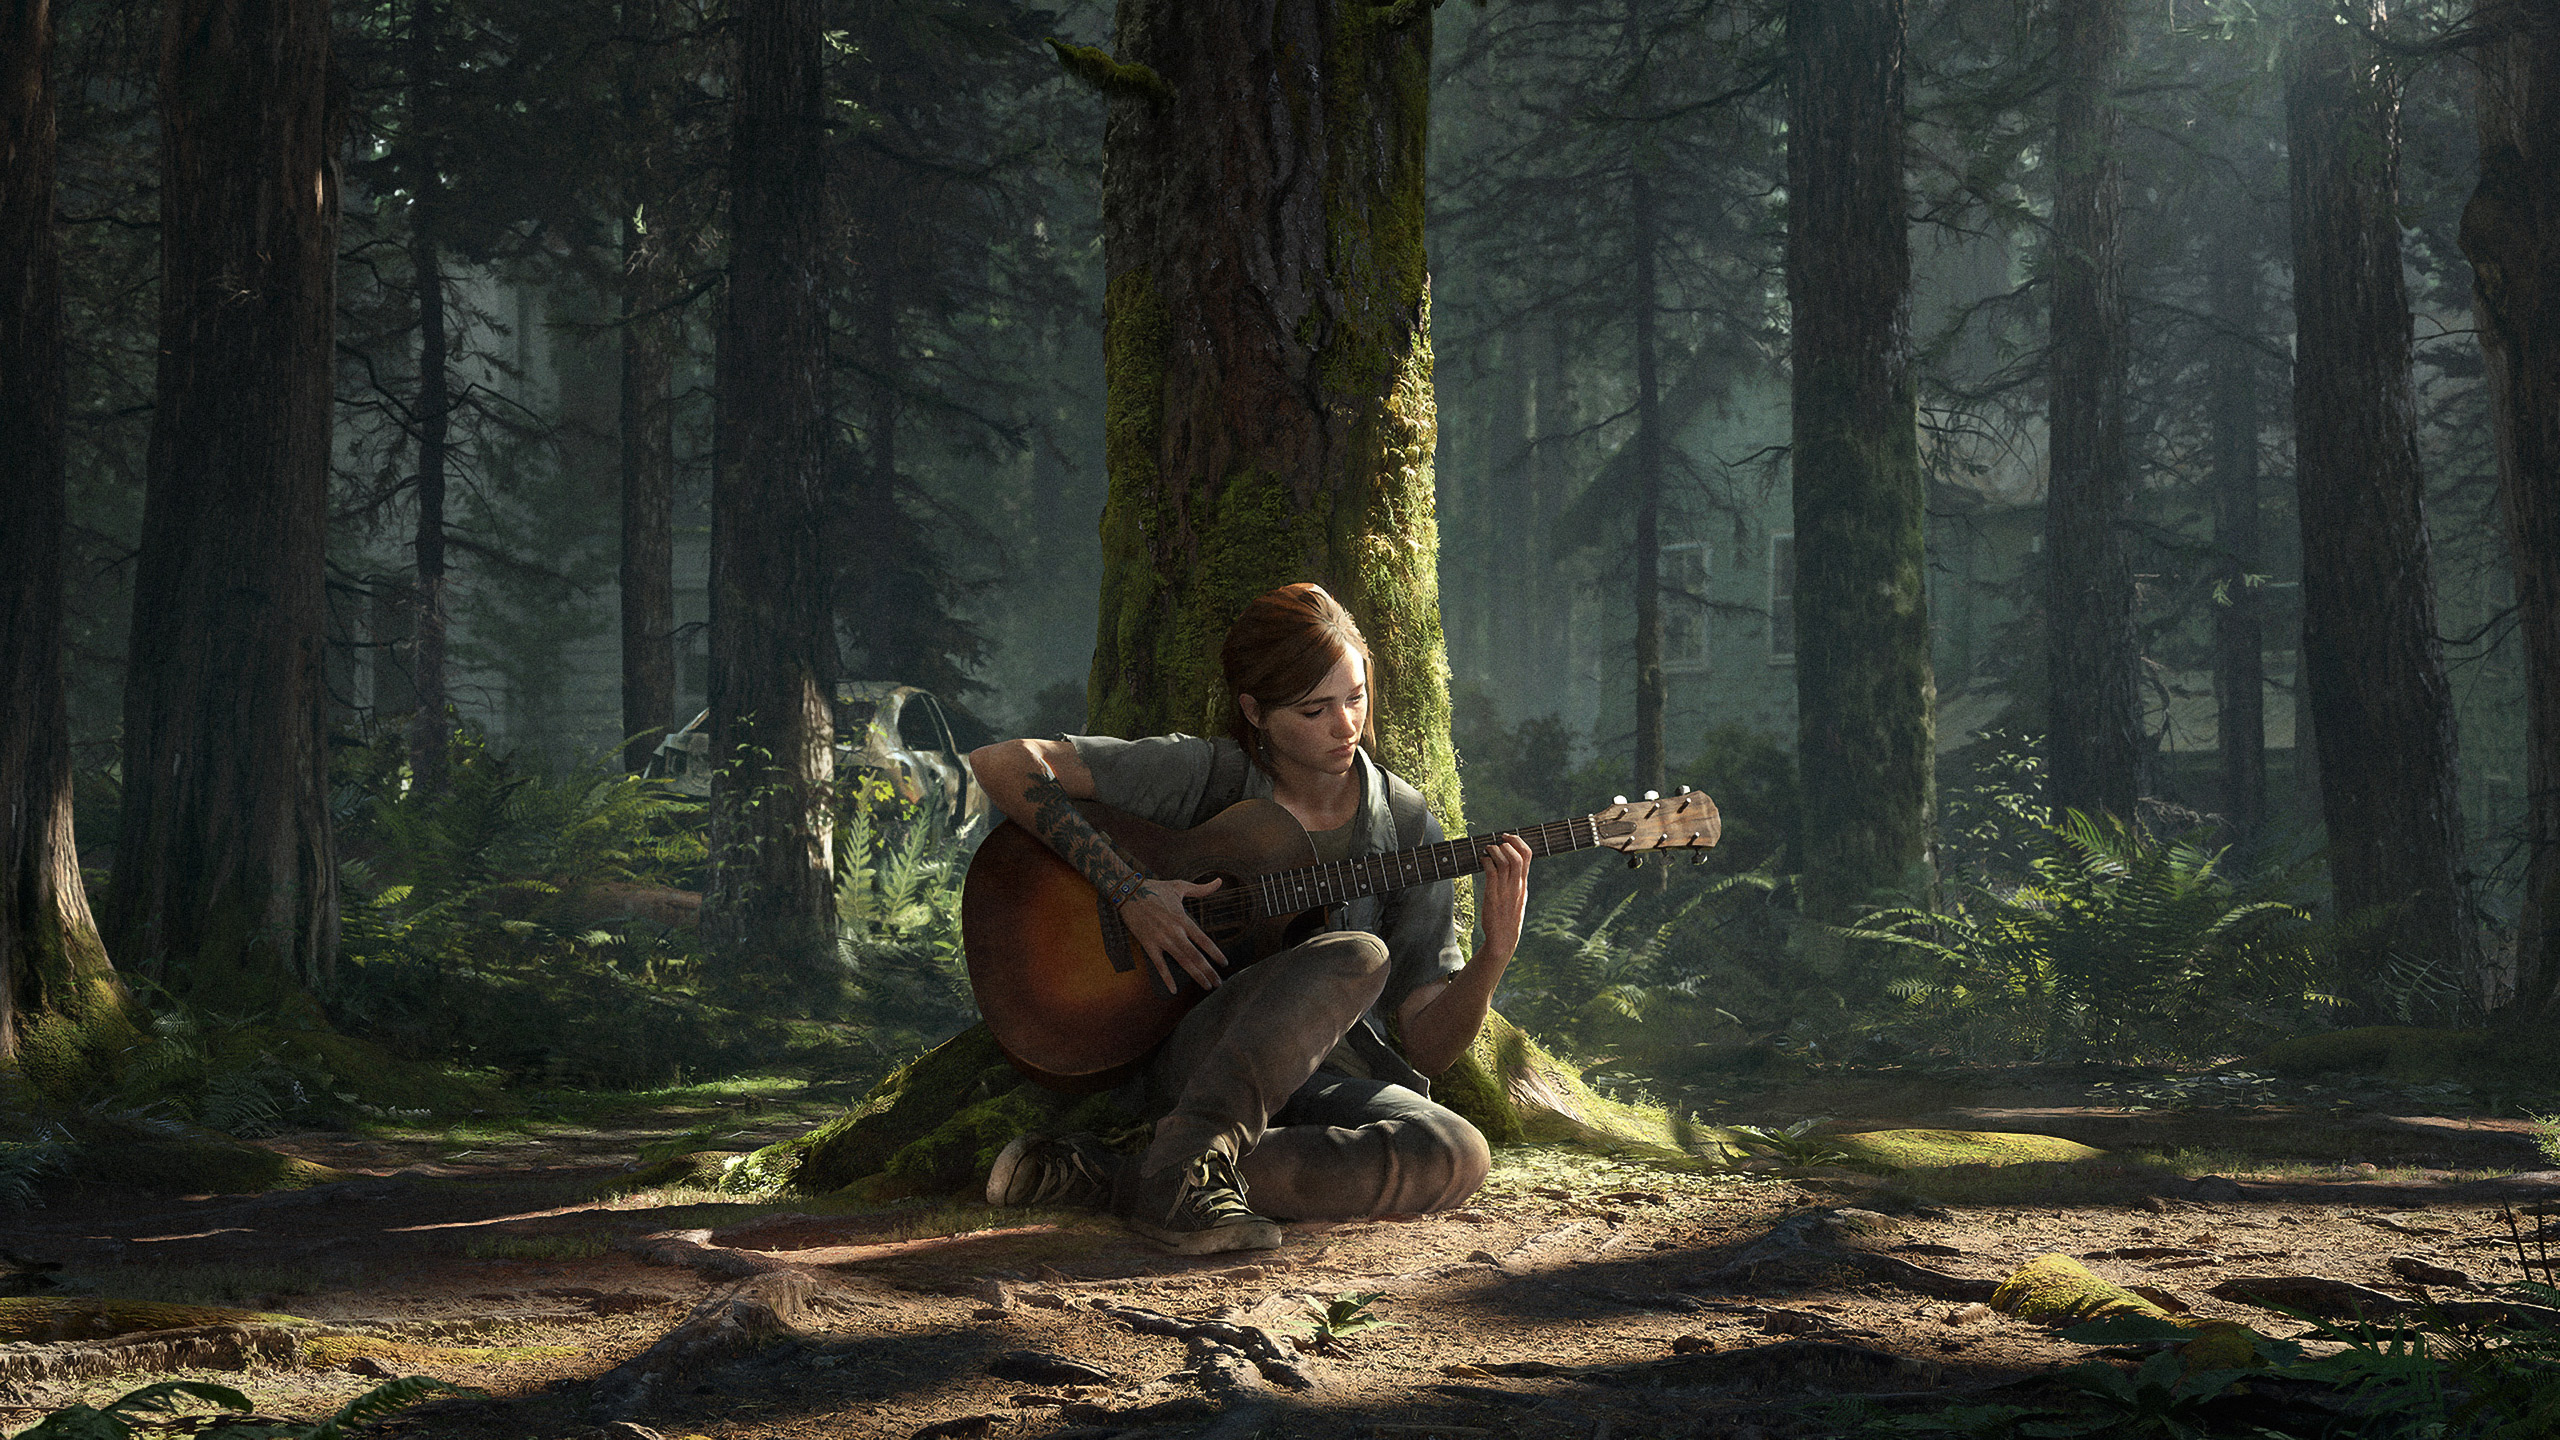 General 2560x1440 Naughty Dog PlayStation Ellie Williams The Last of Us 2 video games video game characters